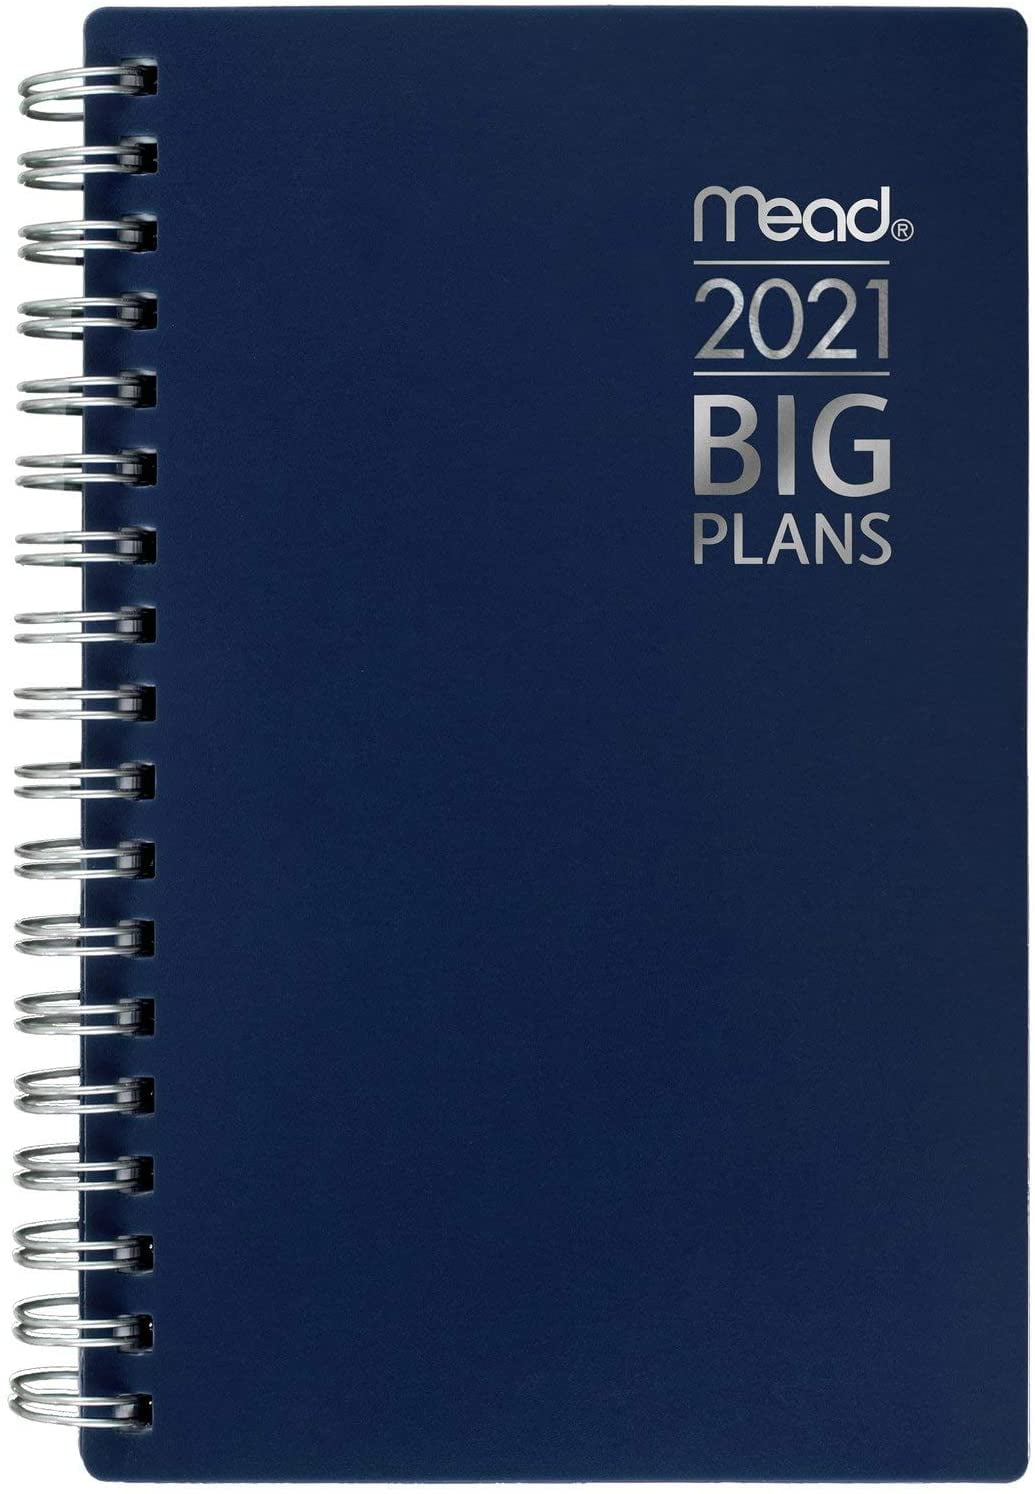 2021 Pocket Calendar by Mead, Weekly & Monthly Planner, 31/2" x 61/4